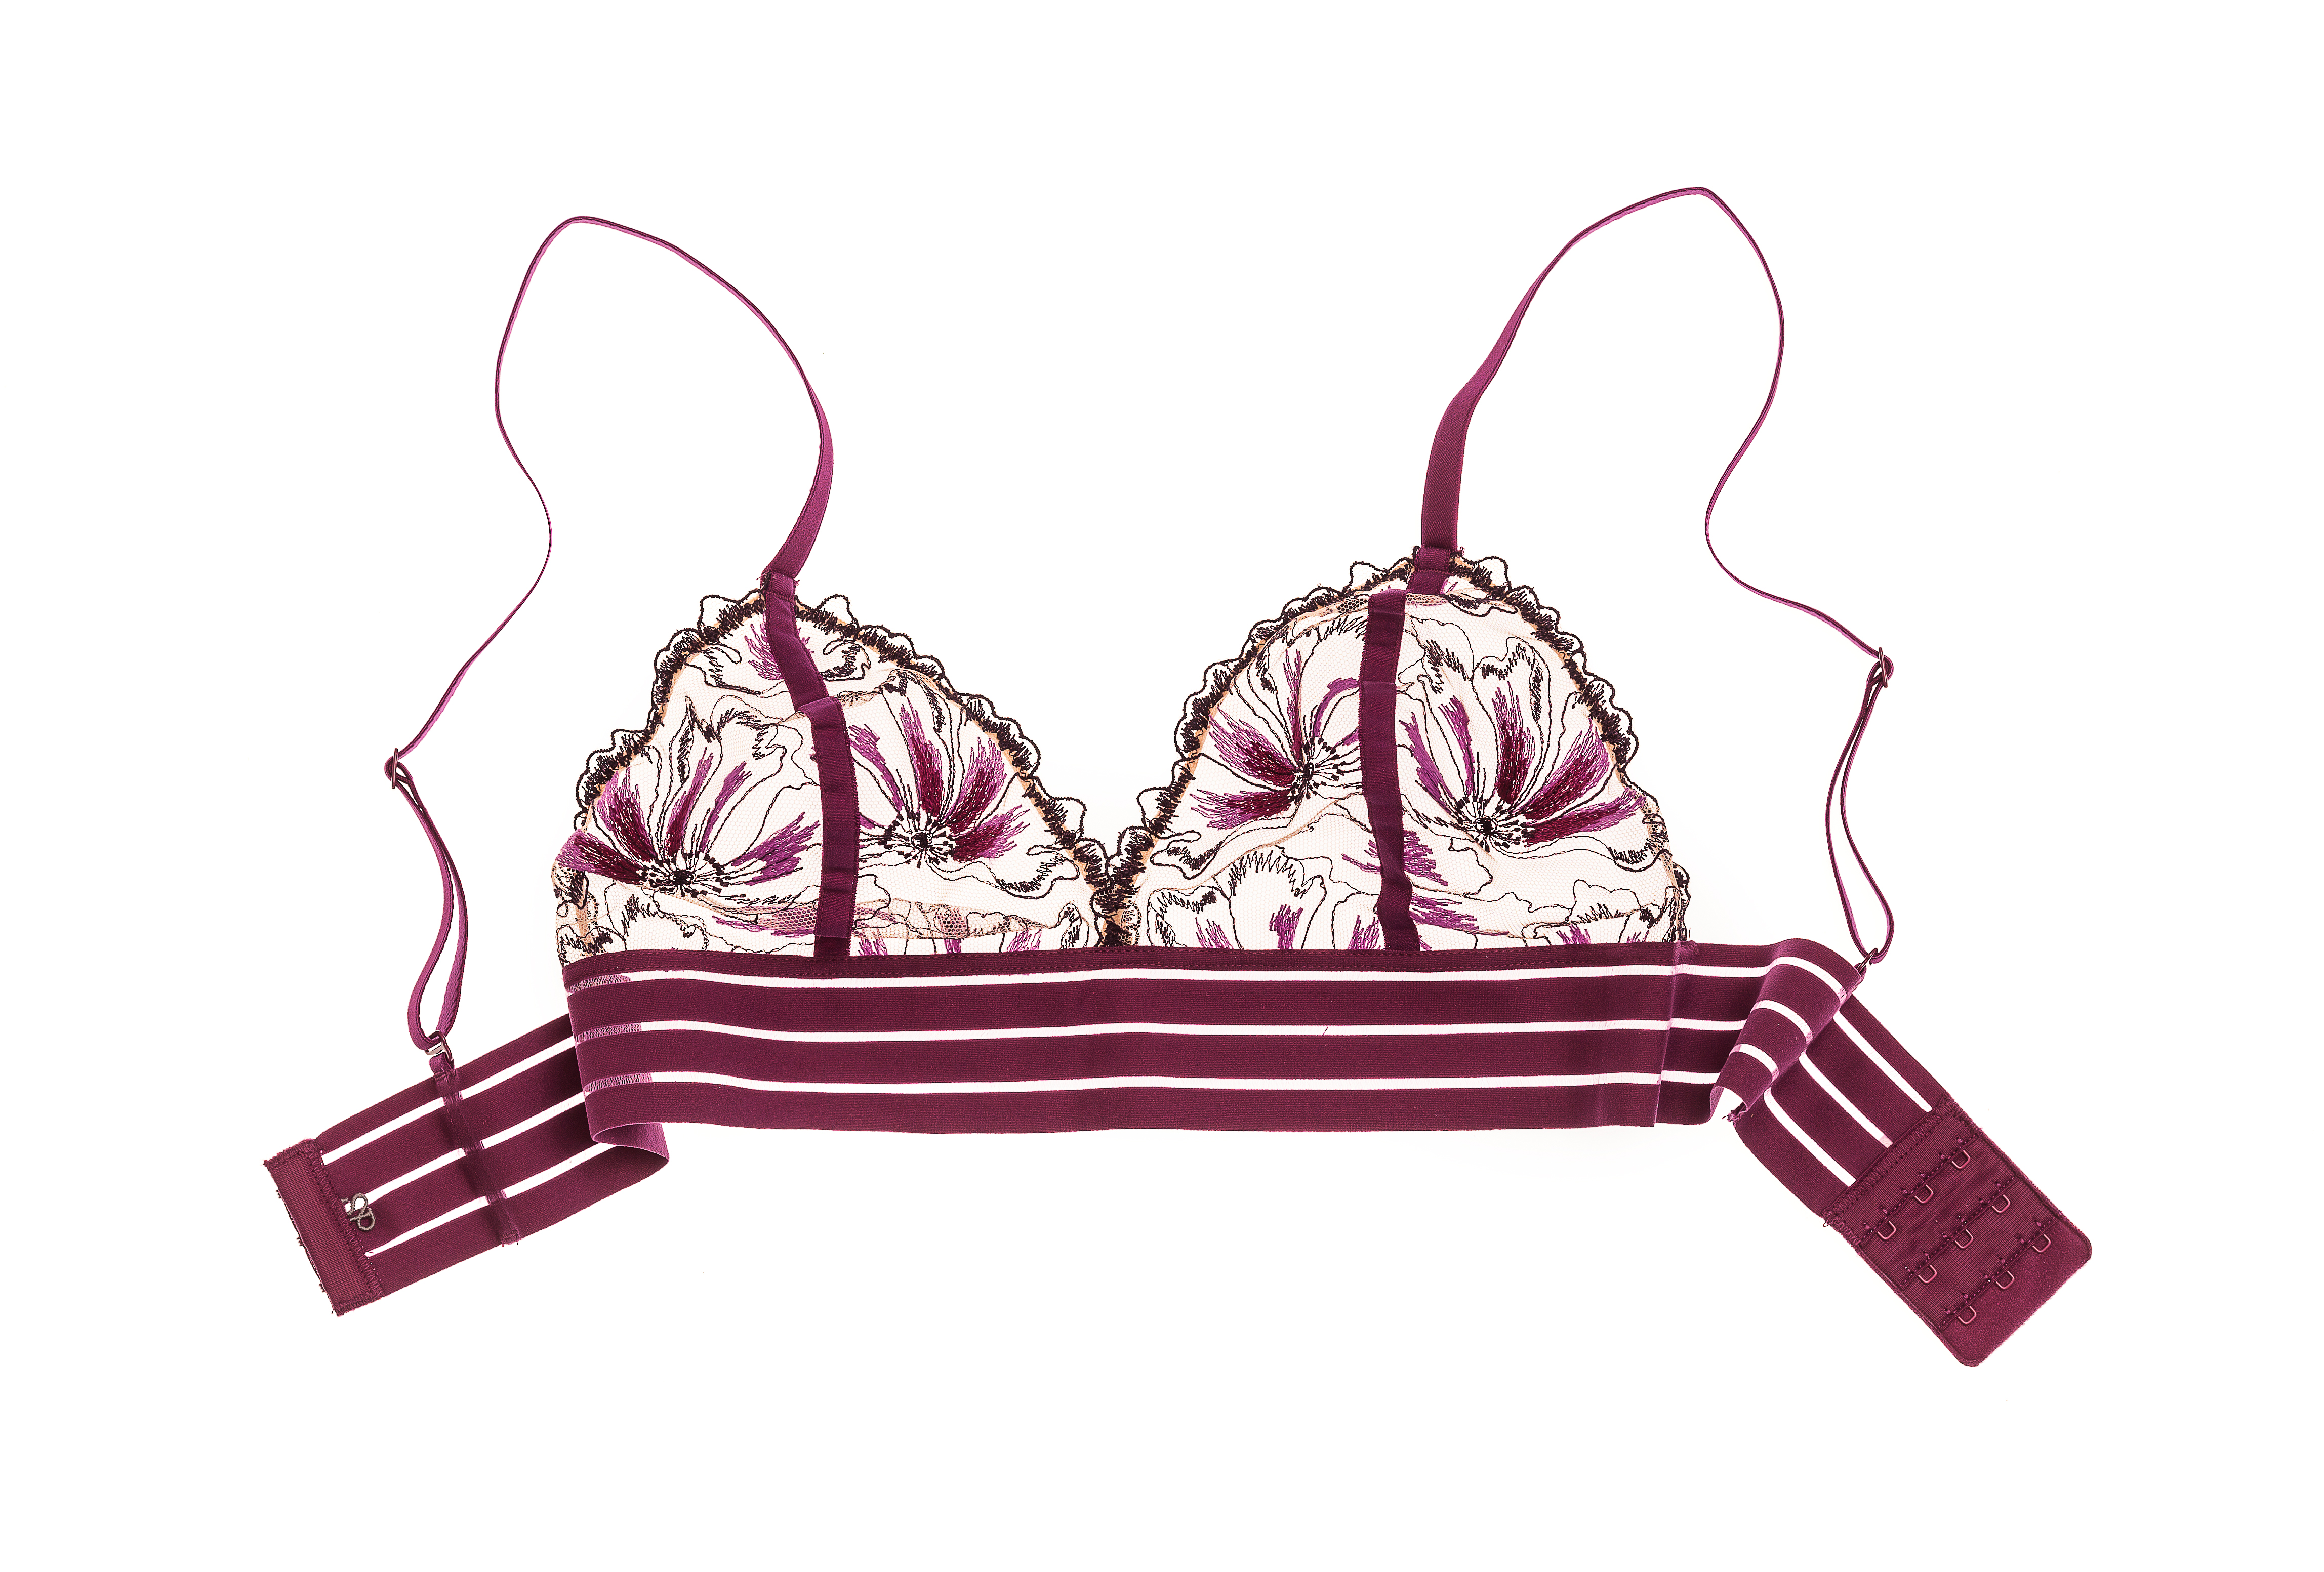 French Lingerie Resists, Study Says